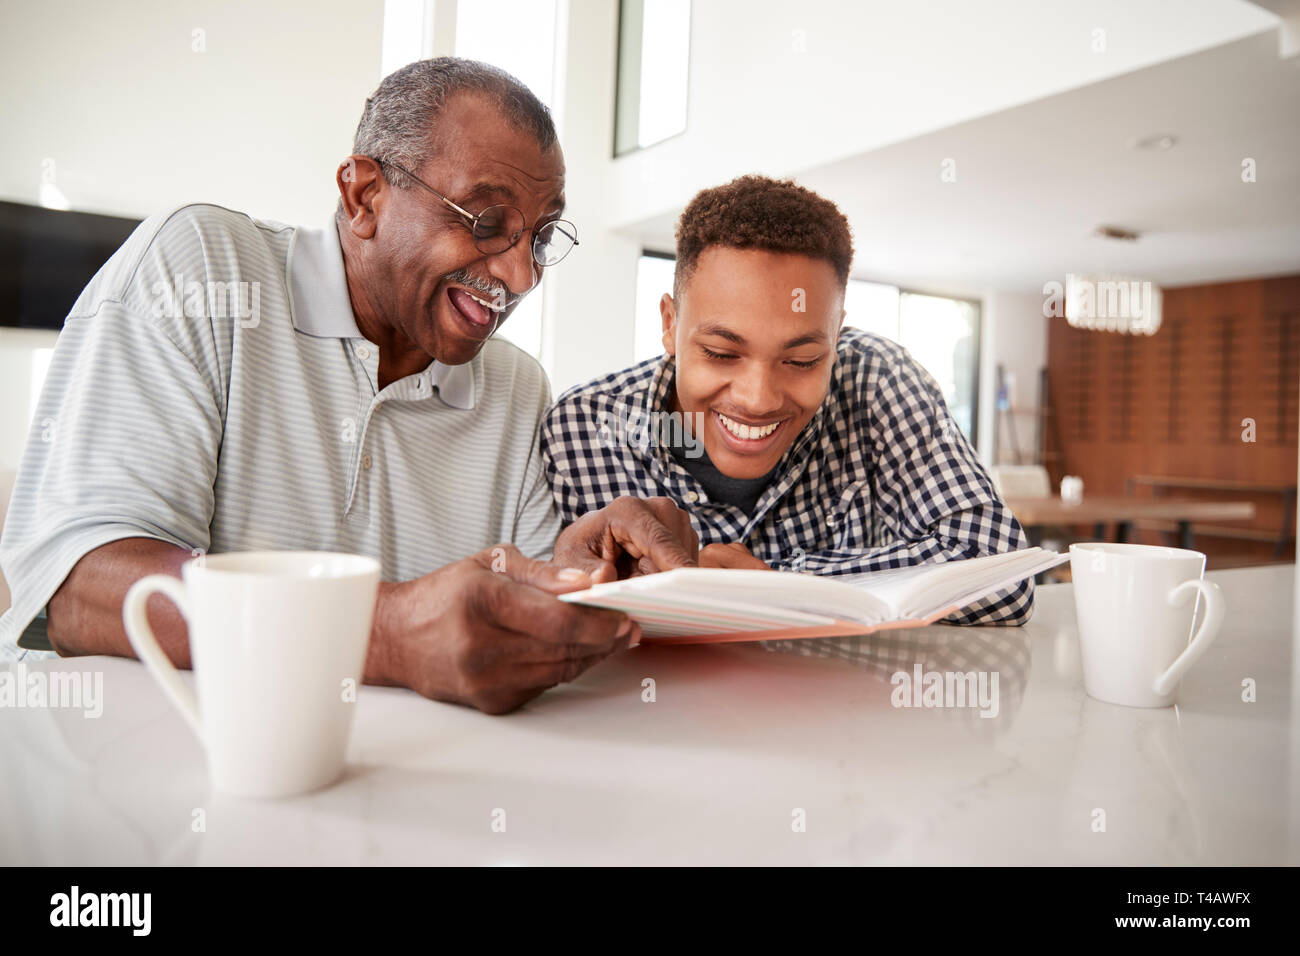 Young black man looking at a photo album at home with his grandfather, close up Stock Photo